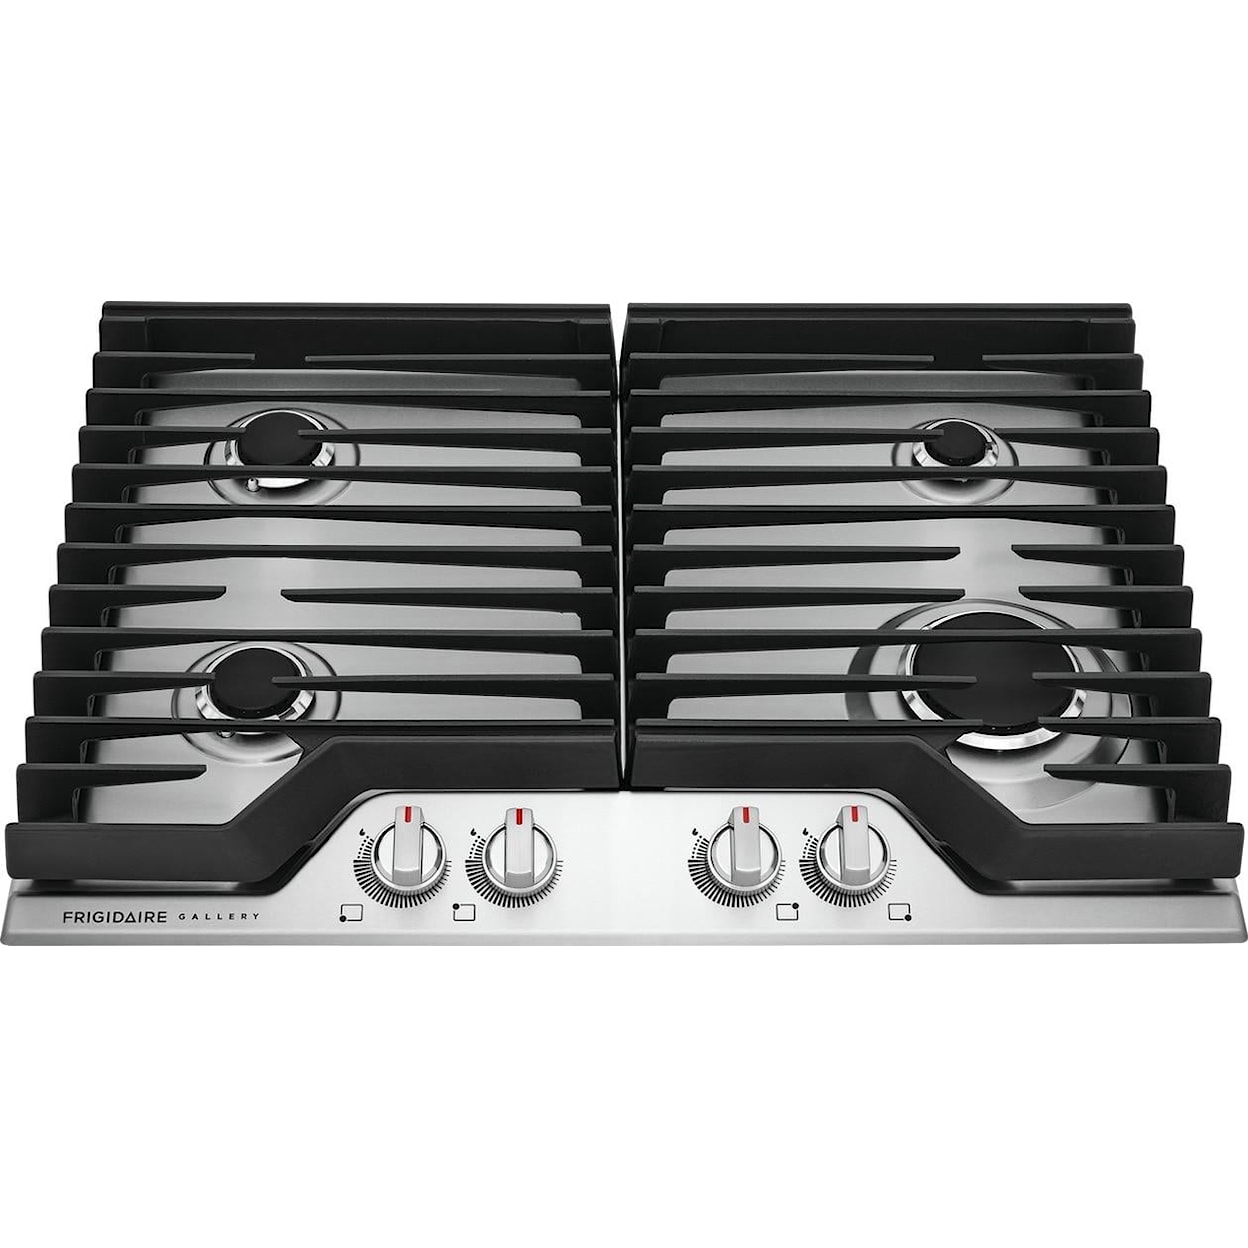 Frigidaire Gallery - GCCE3049AS - 30 Electric Cooktop-GCCE3049AS